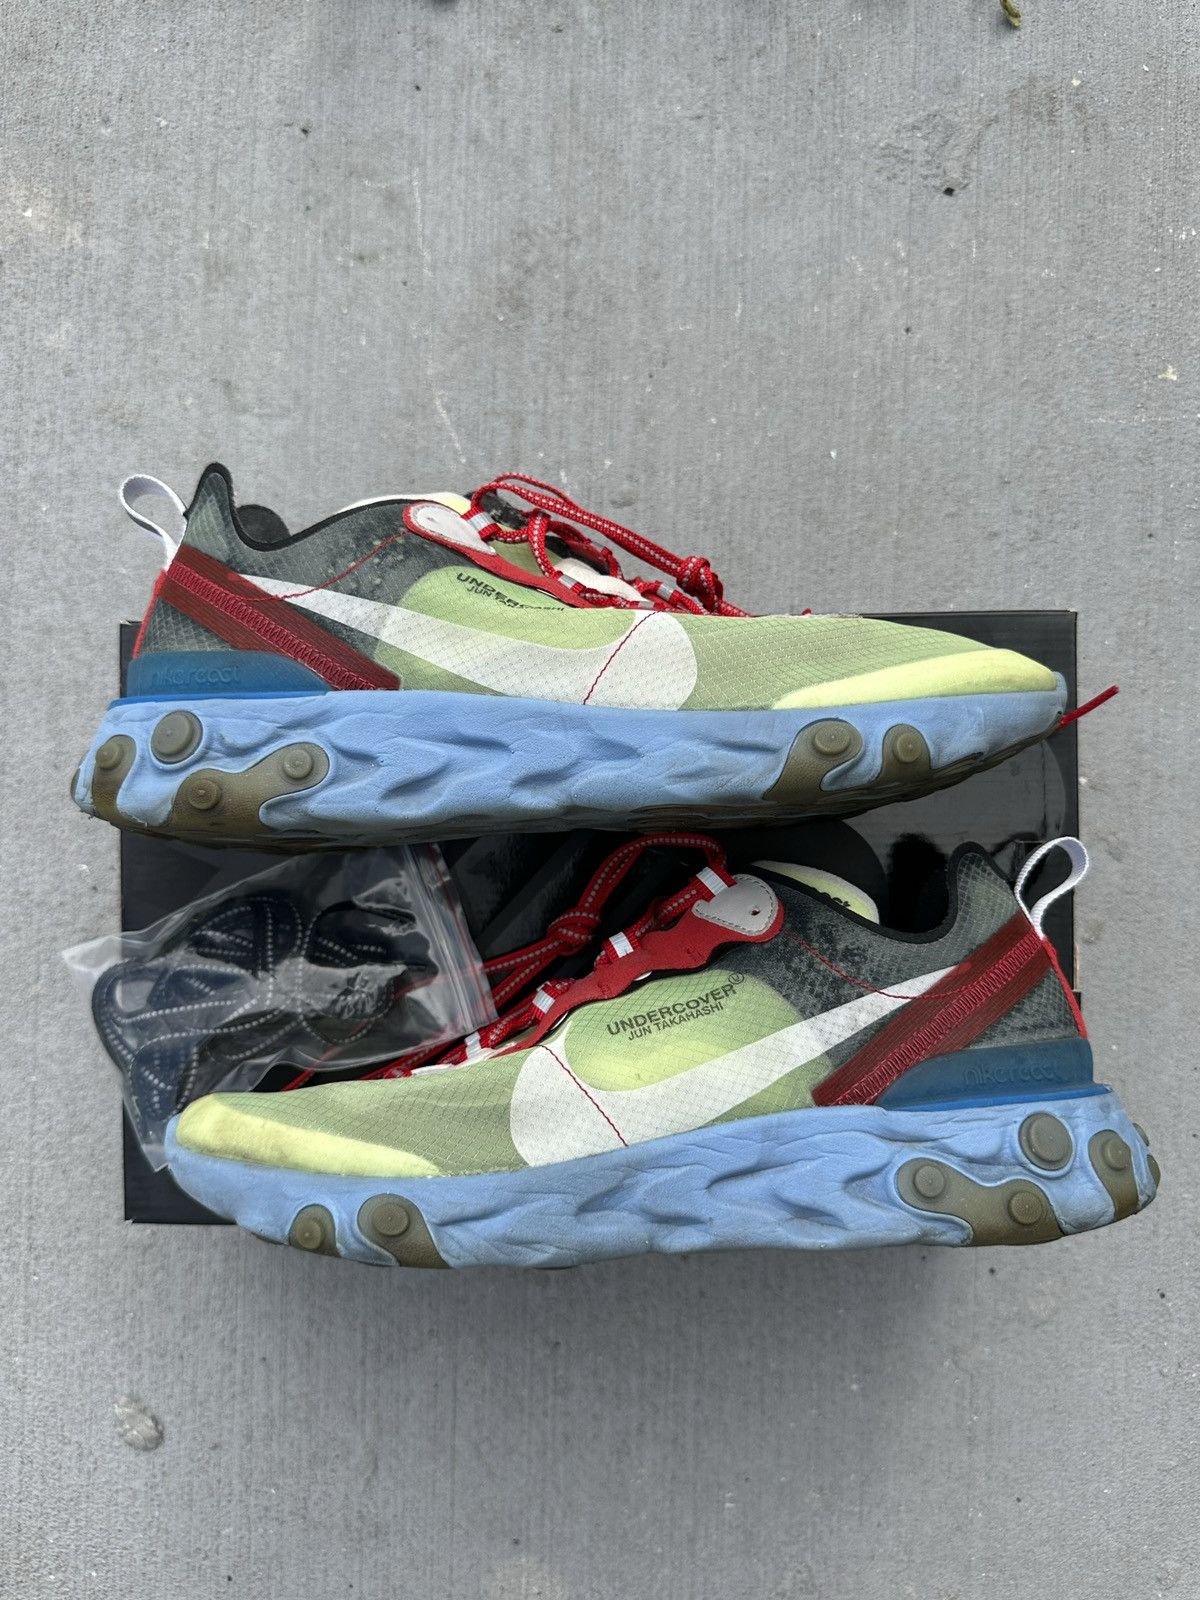 Undercover UNDERCOVER Jun Takahashi NIKE REACT Element 87 Sneaker Shoes |  Grailed